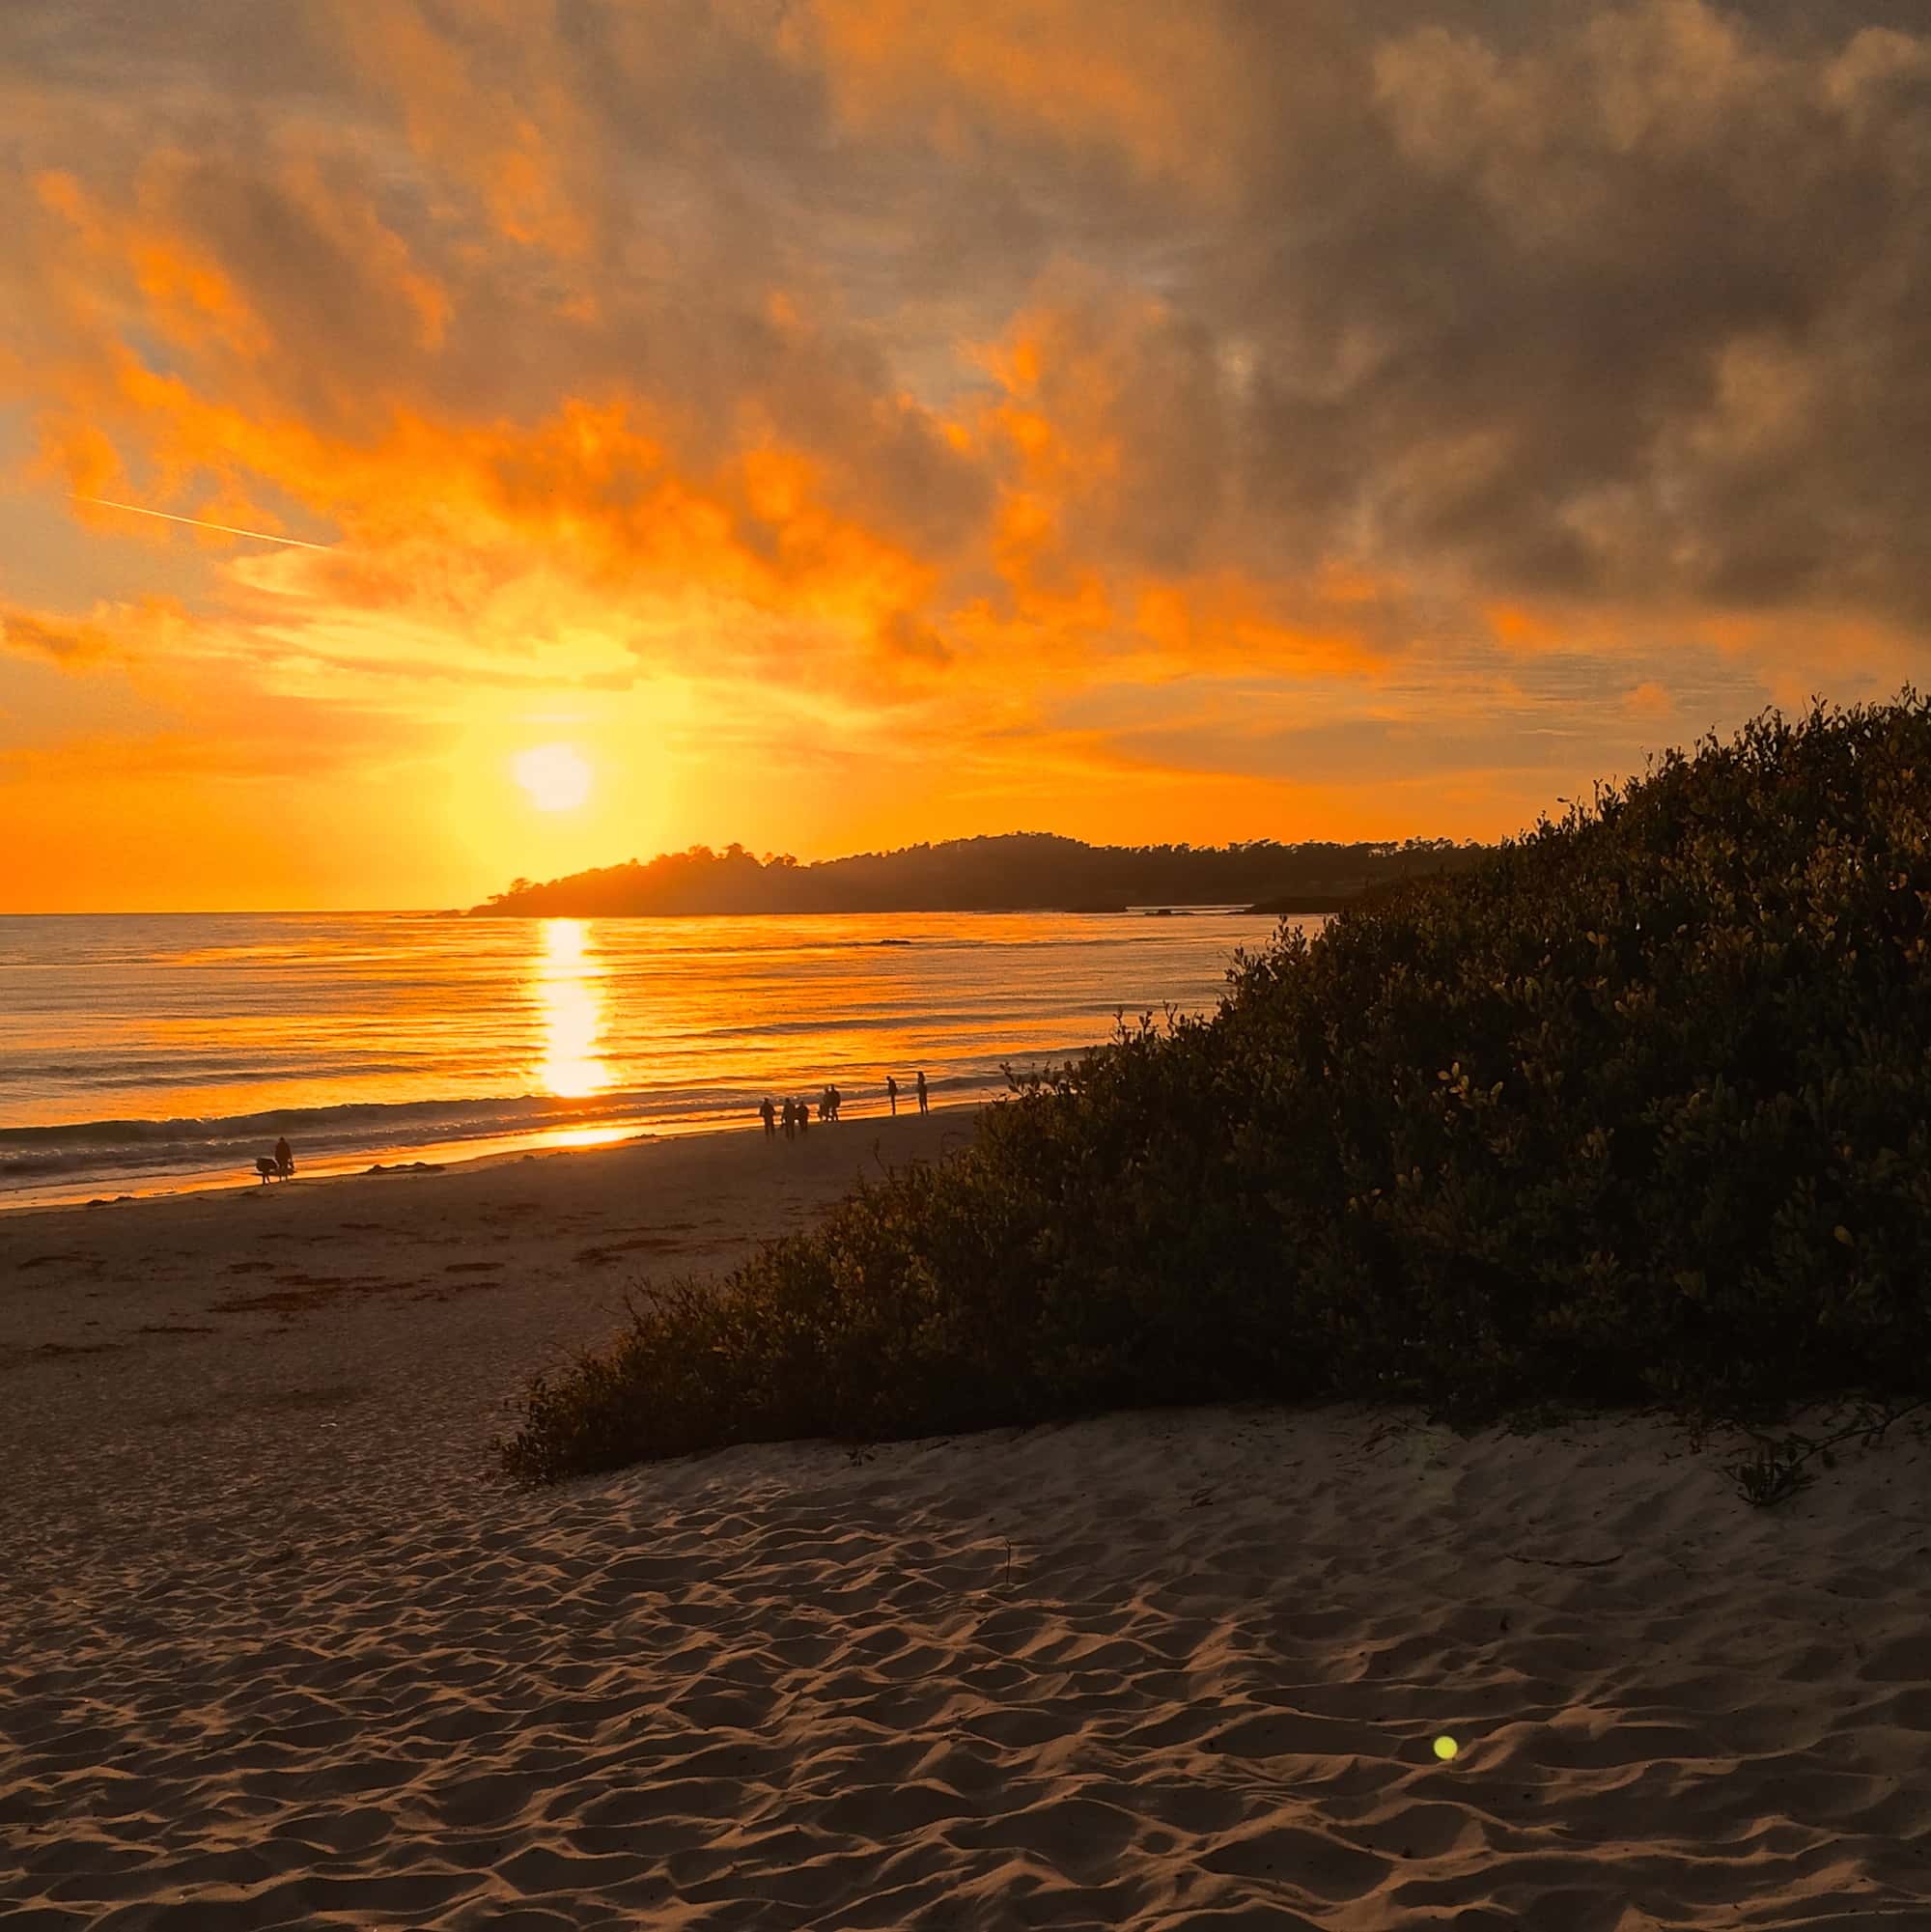 Sunset at Carmel-by-the-Sea.